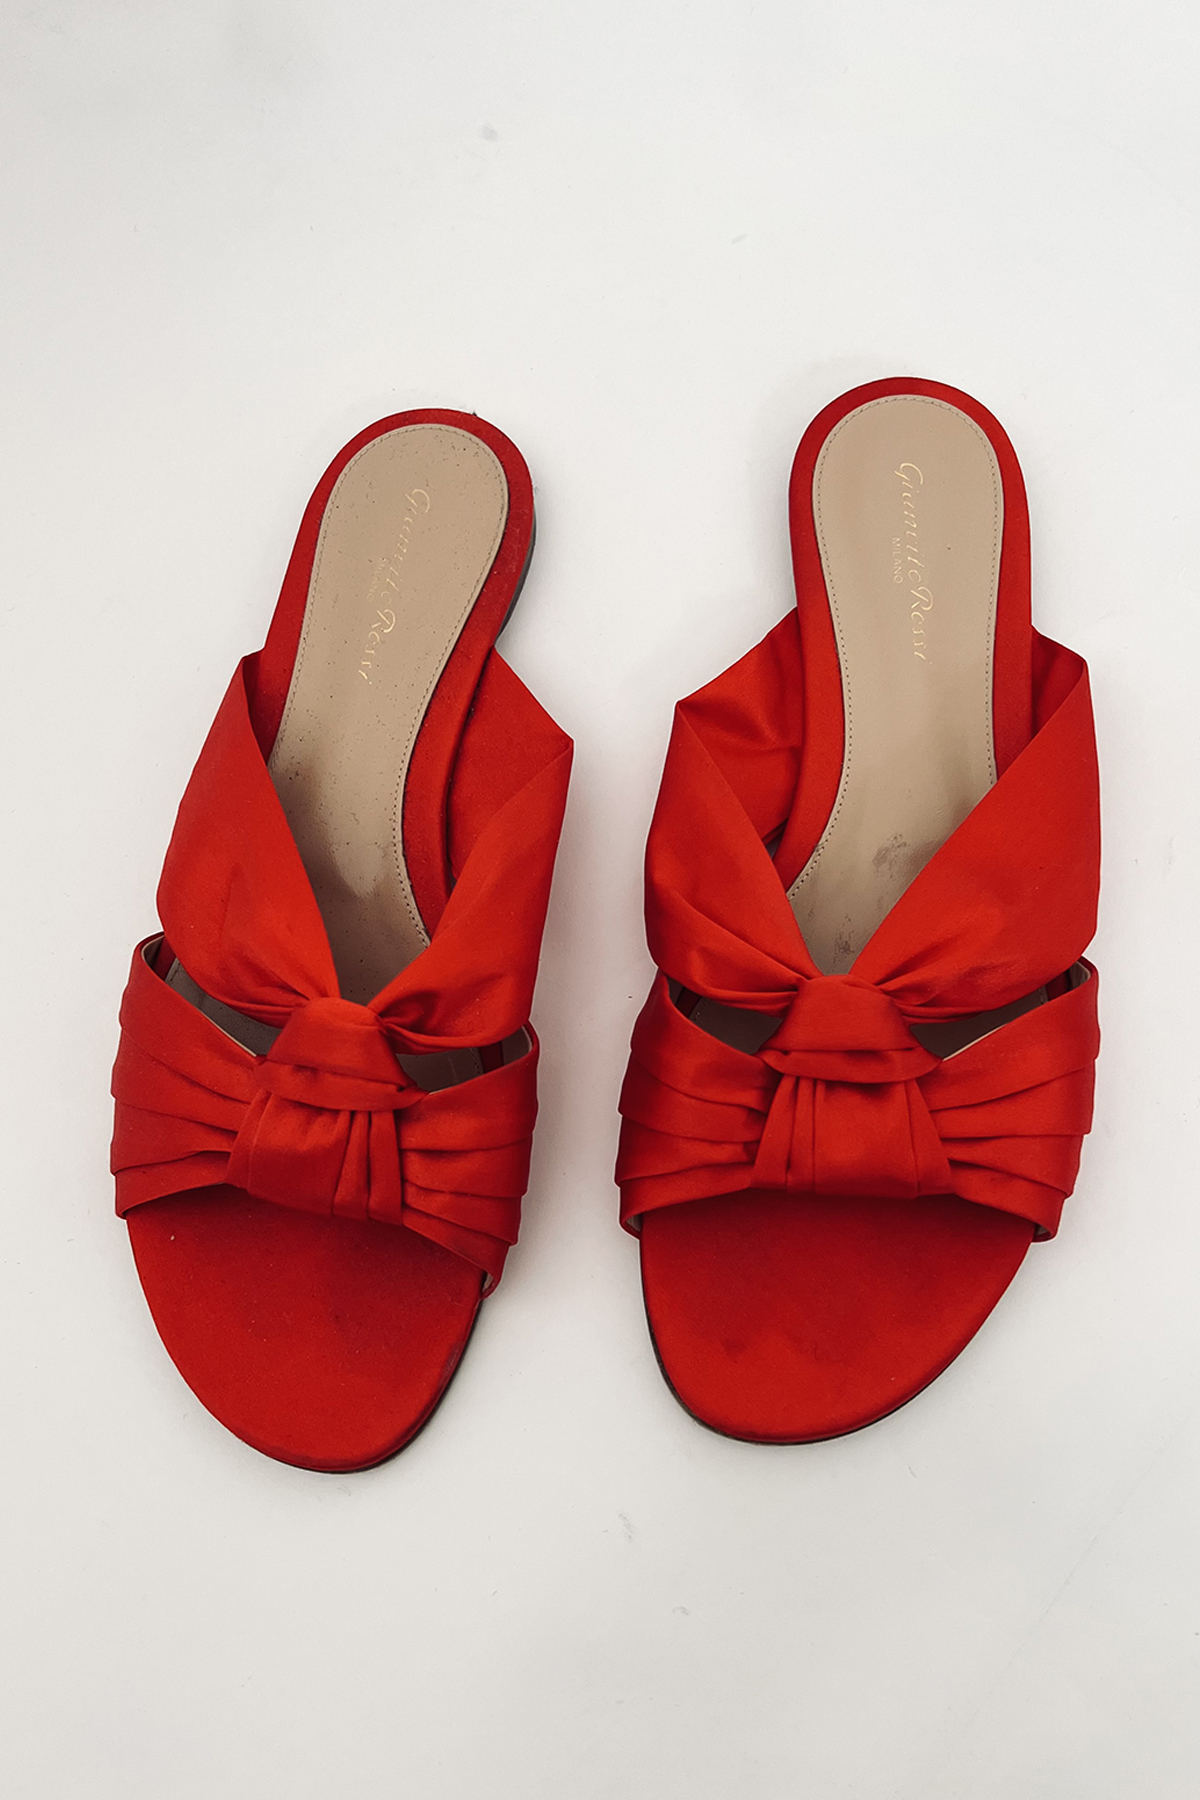 Gianvito Rossi Red Sandals - Size 41